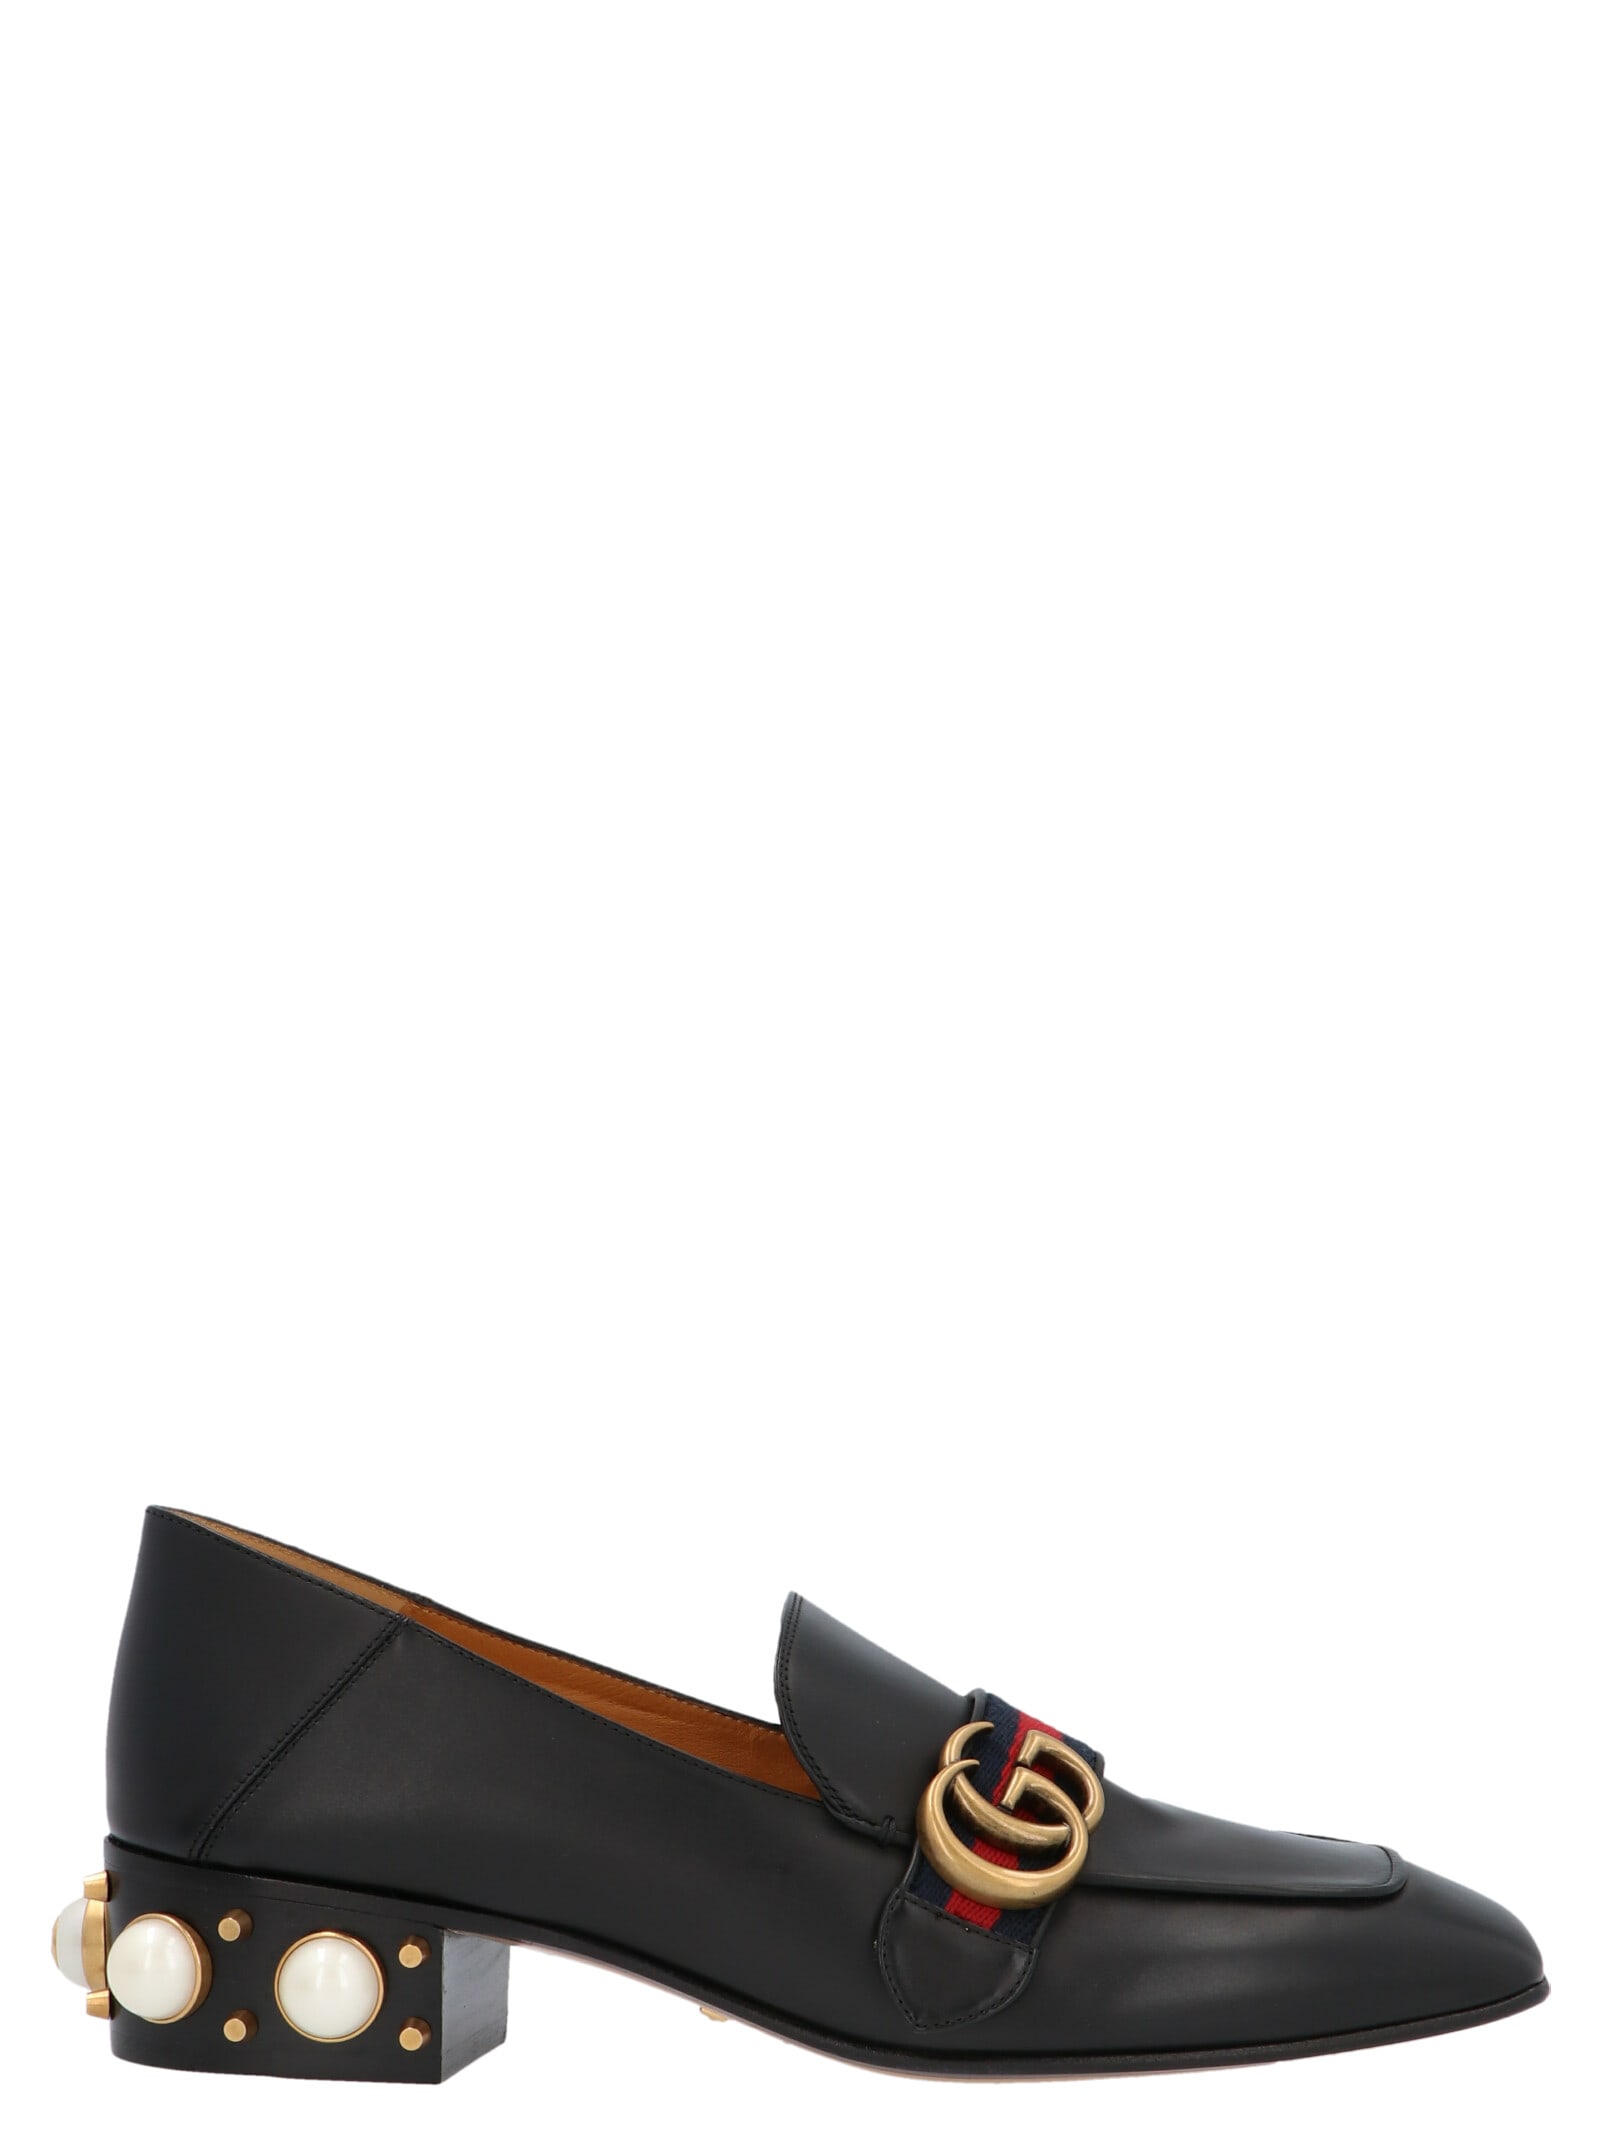 Gucci Leather Mid-heel Loafer